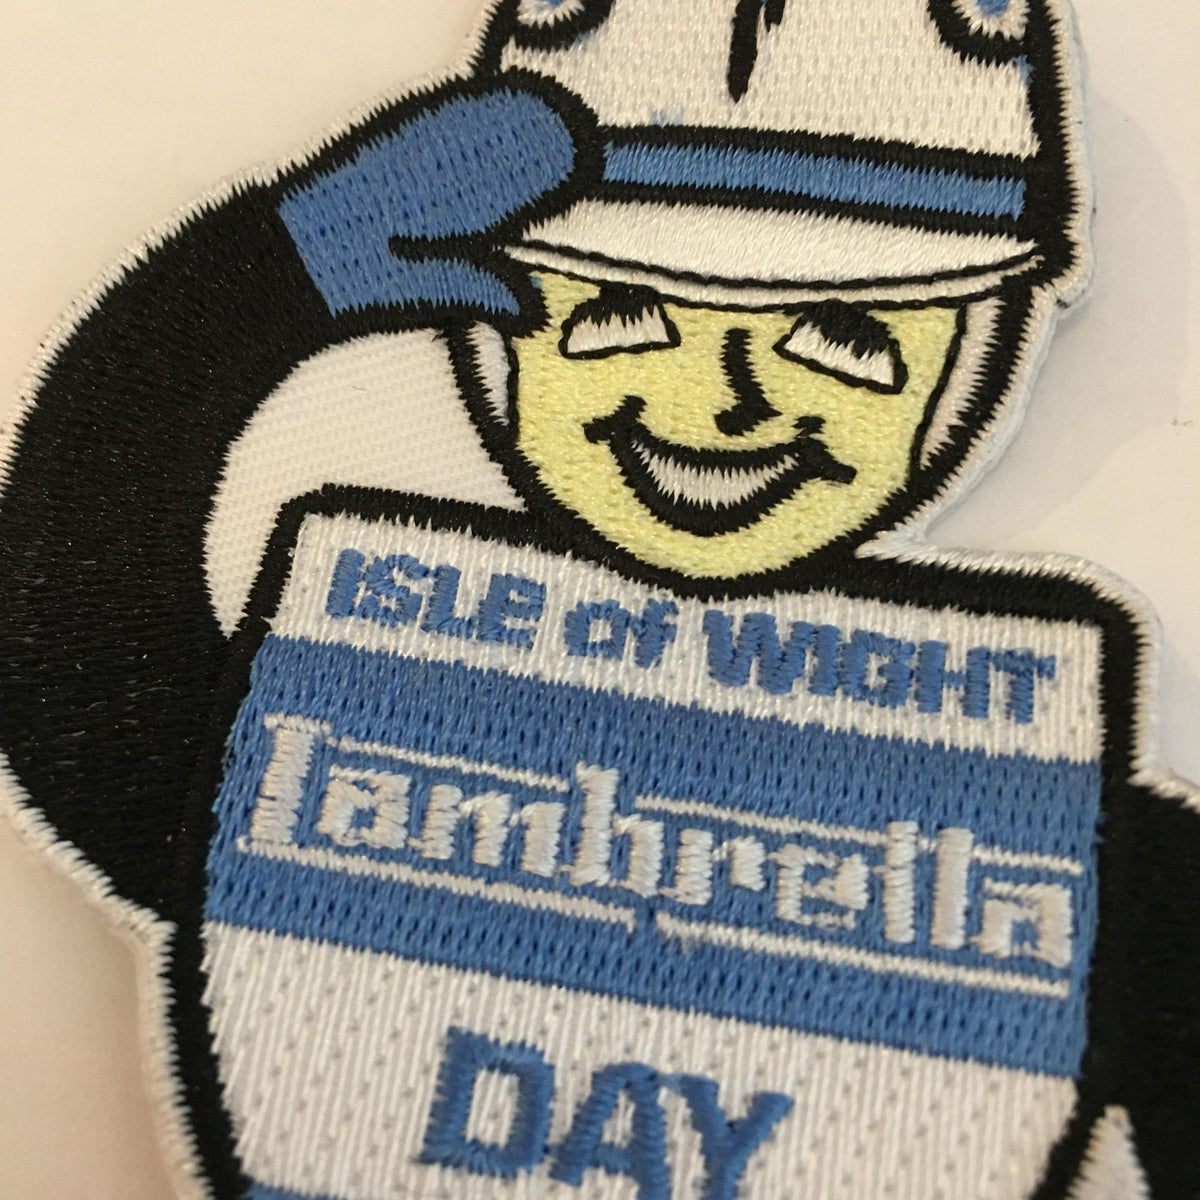 Isle of Wight Lambretta Day Embroidered Patch